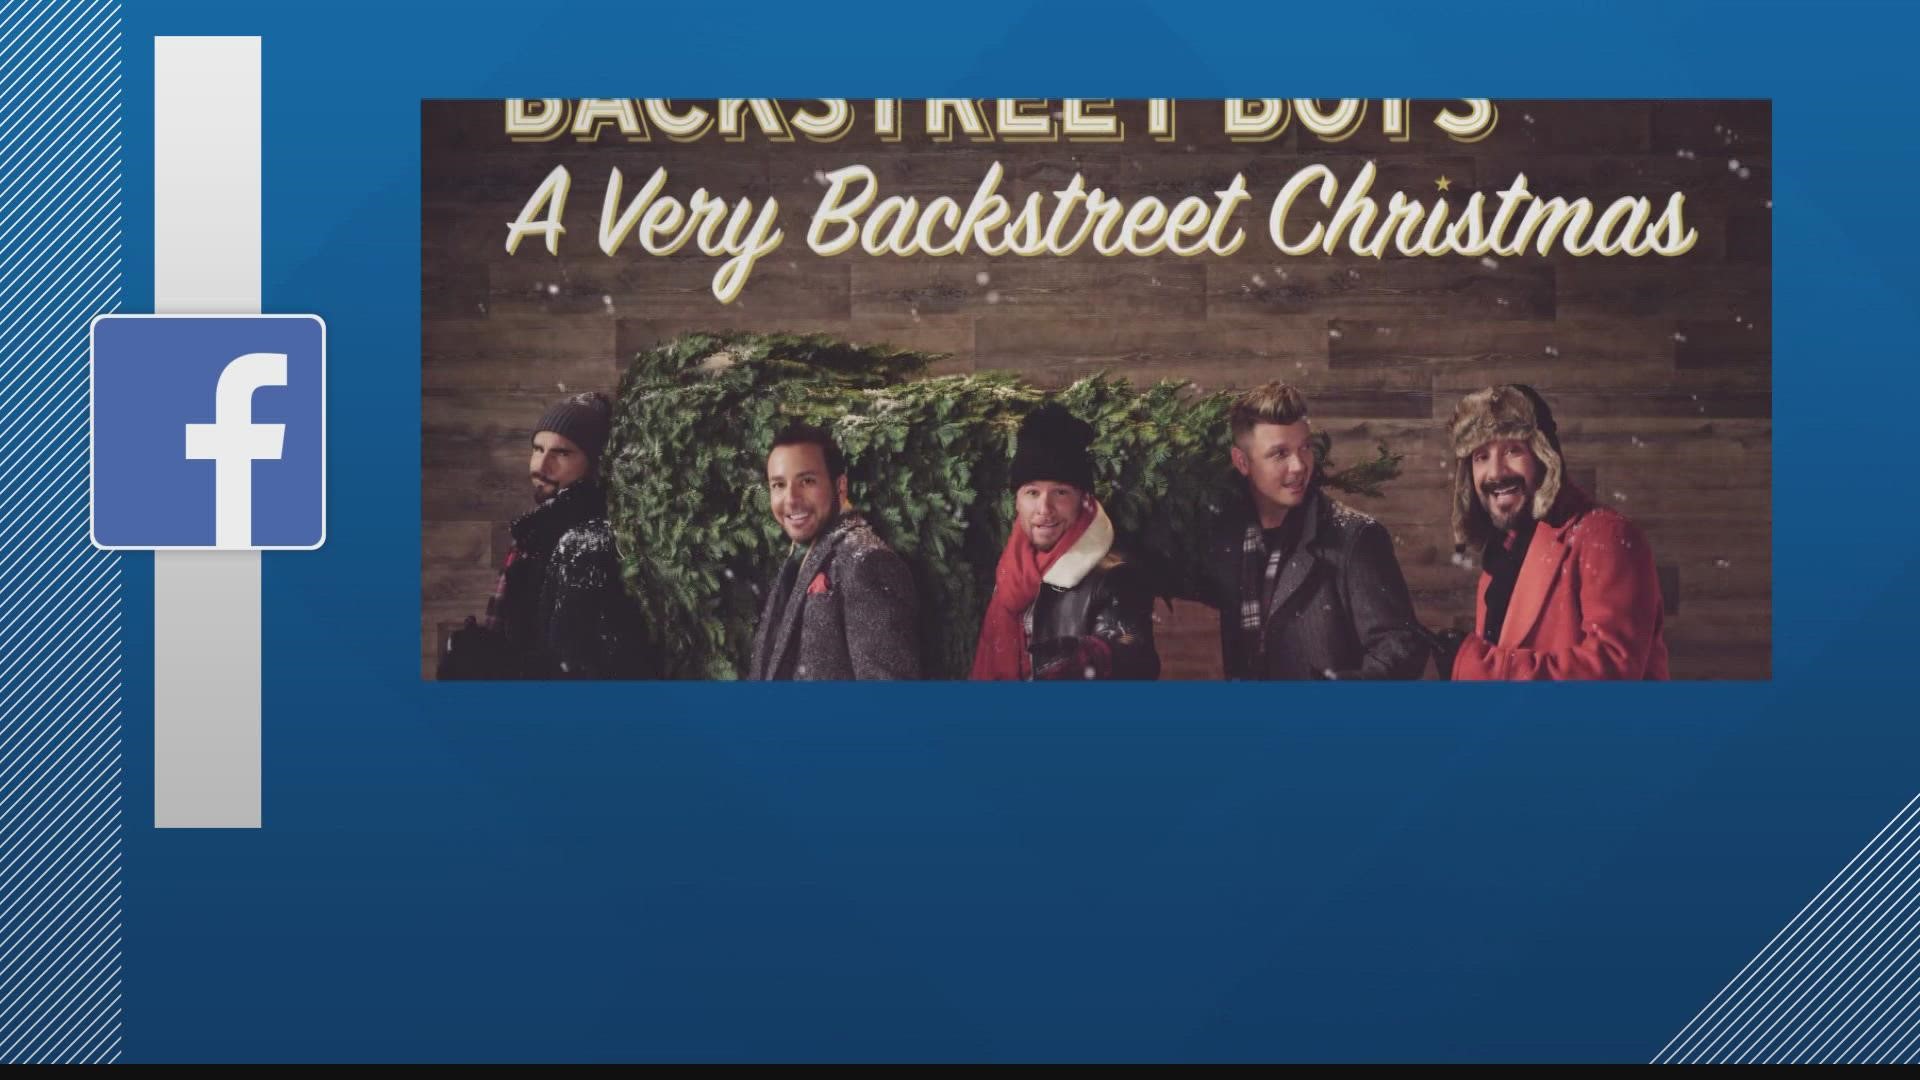 "A Very Backstreet Christmas" will be released Friday, Oct. 14, 2022.